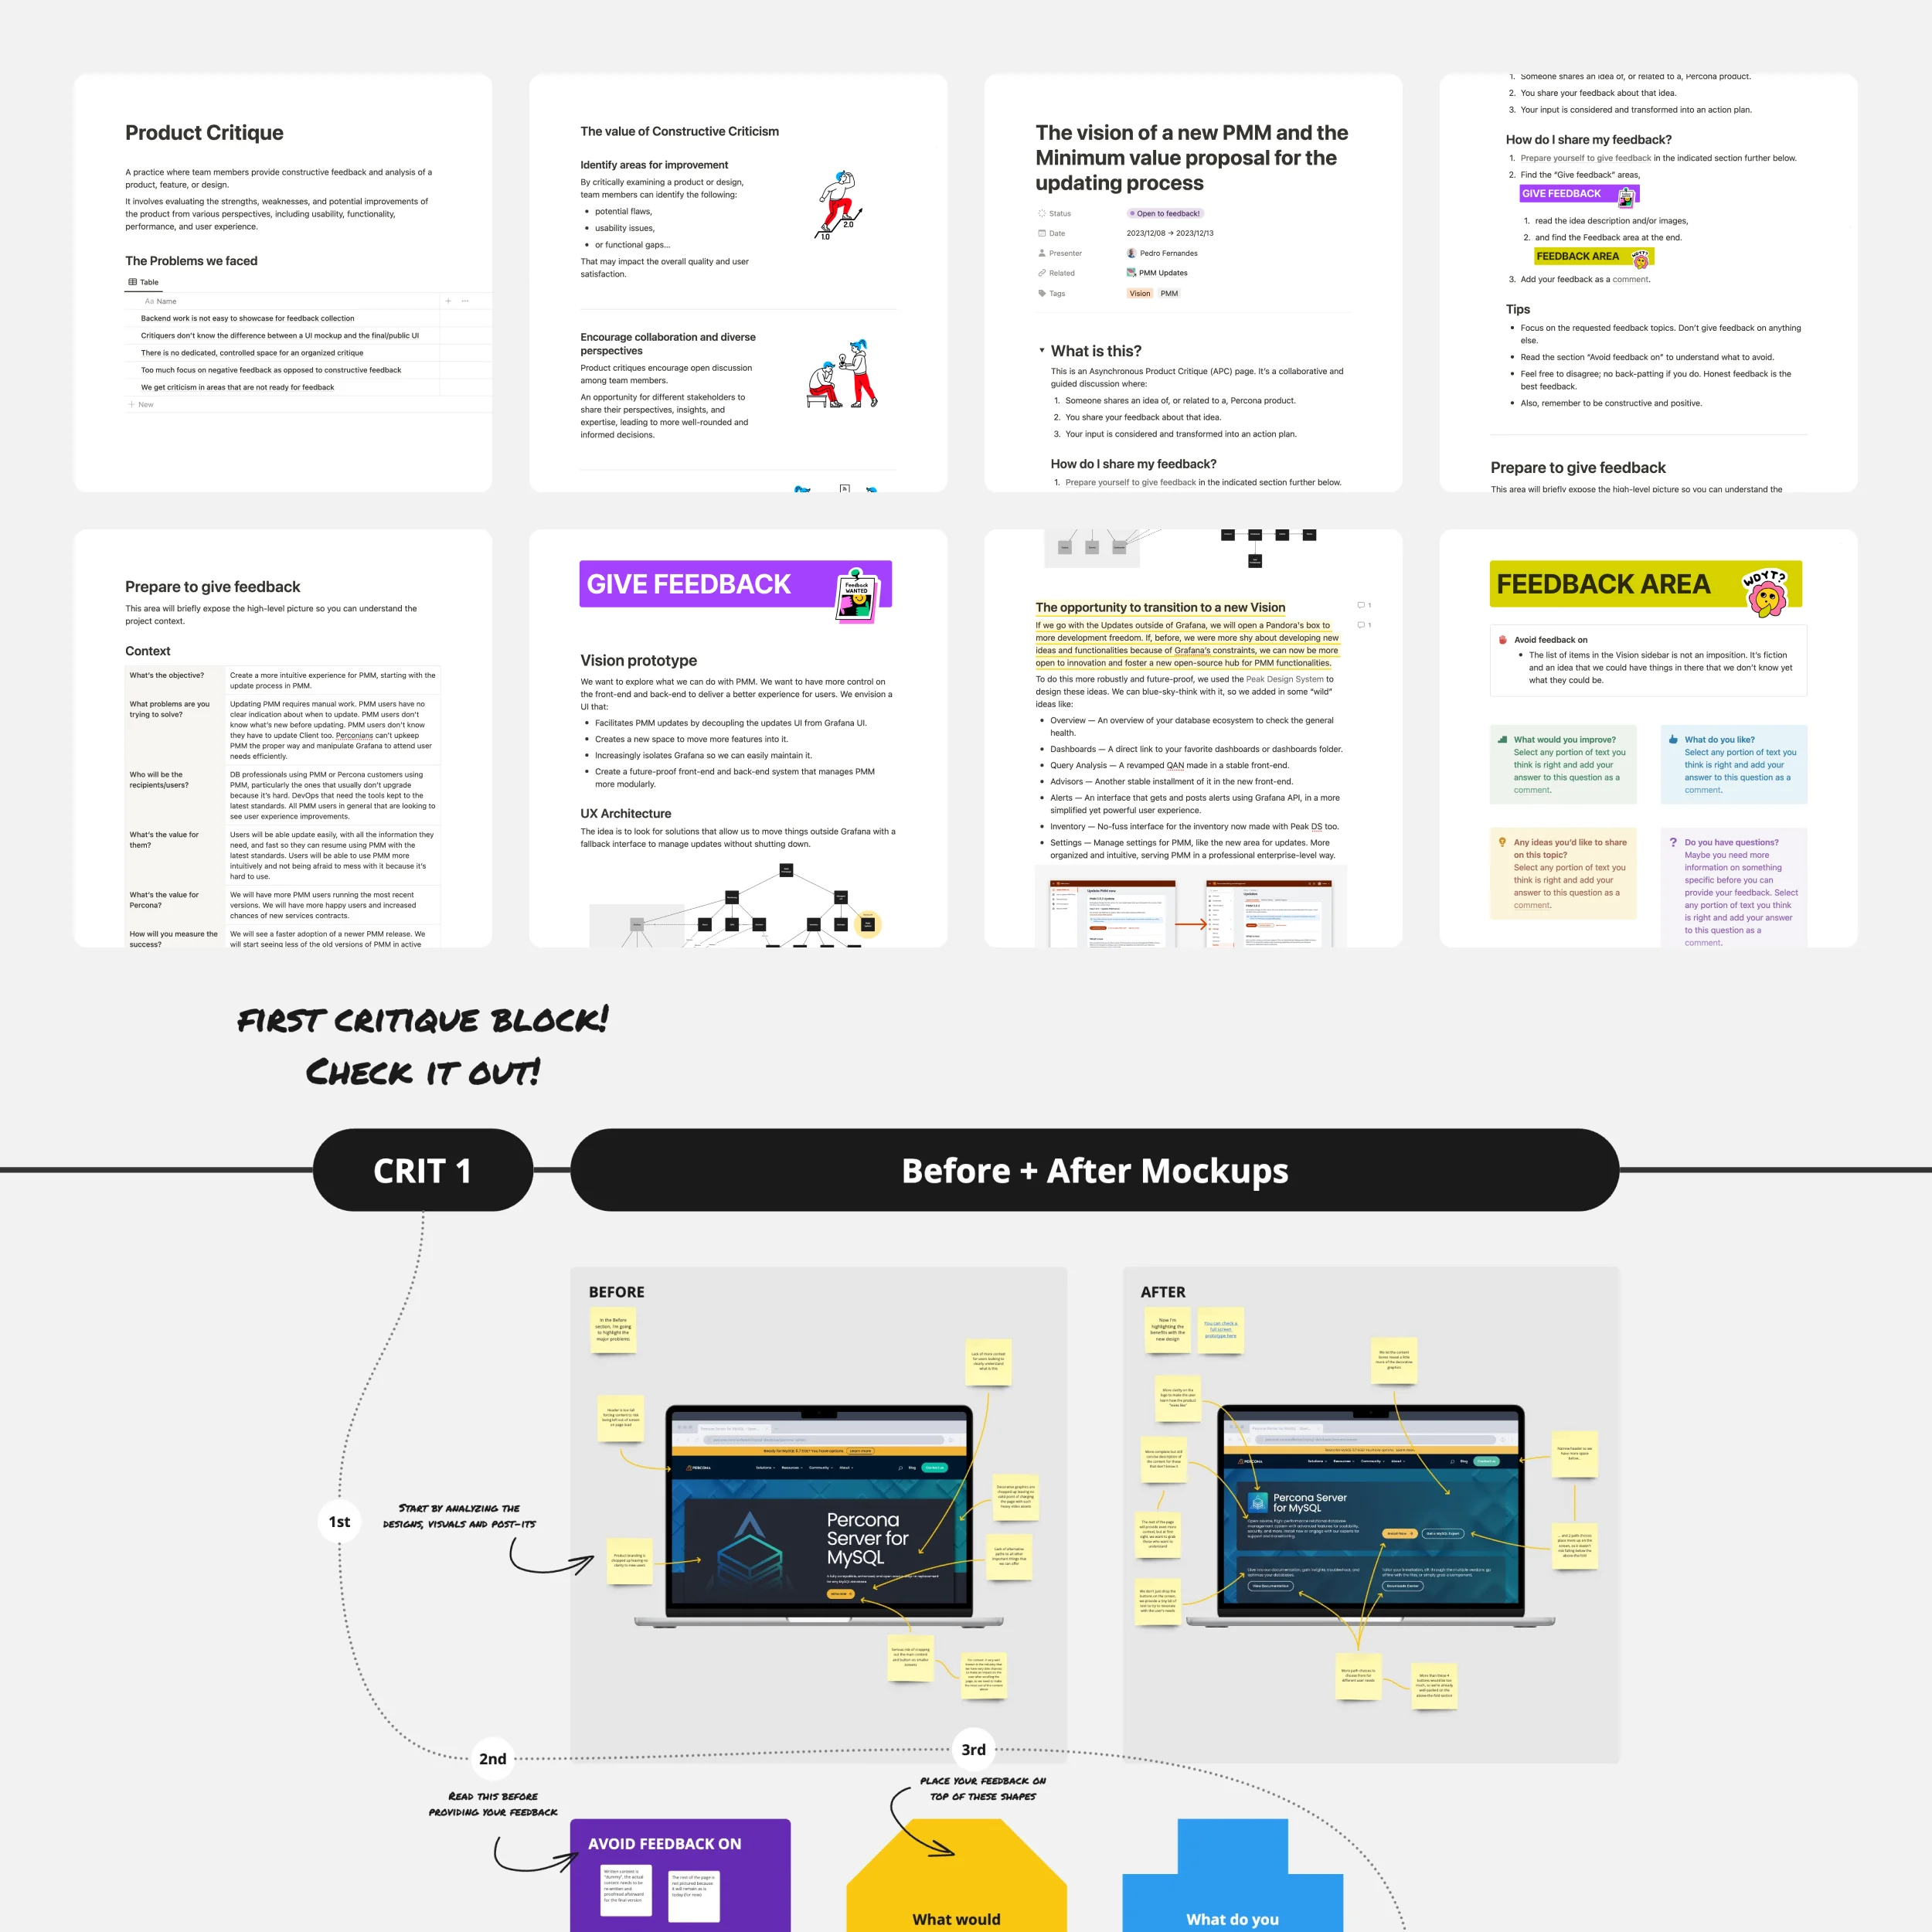 Screenshots of documentation bits about preparing and hosting a critique. Primarily textual bits describing guidelines and best practices. Below these screenshots is a diagram on a digital whiteboard with screenshots of a web design post-it annotations on top.